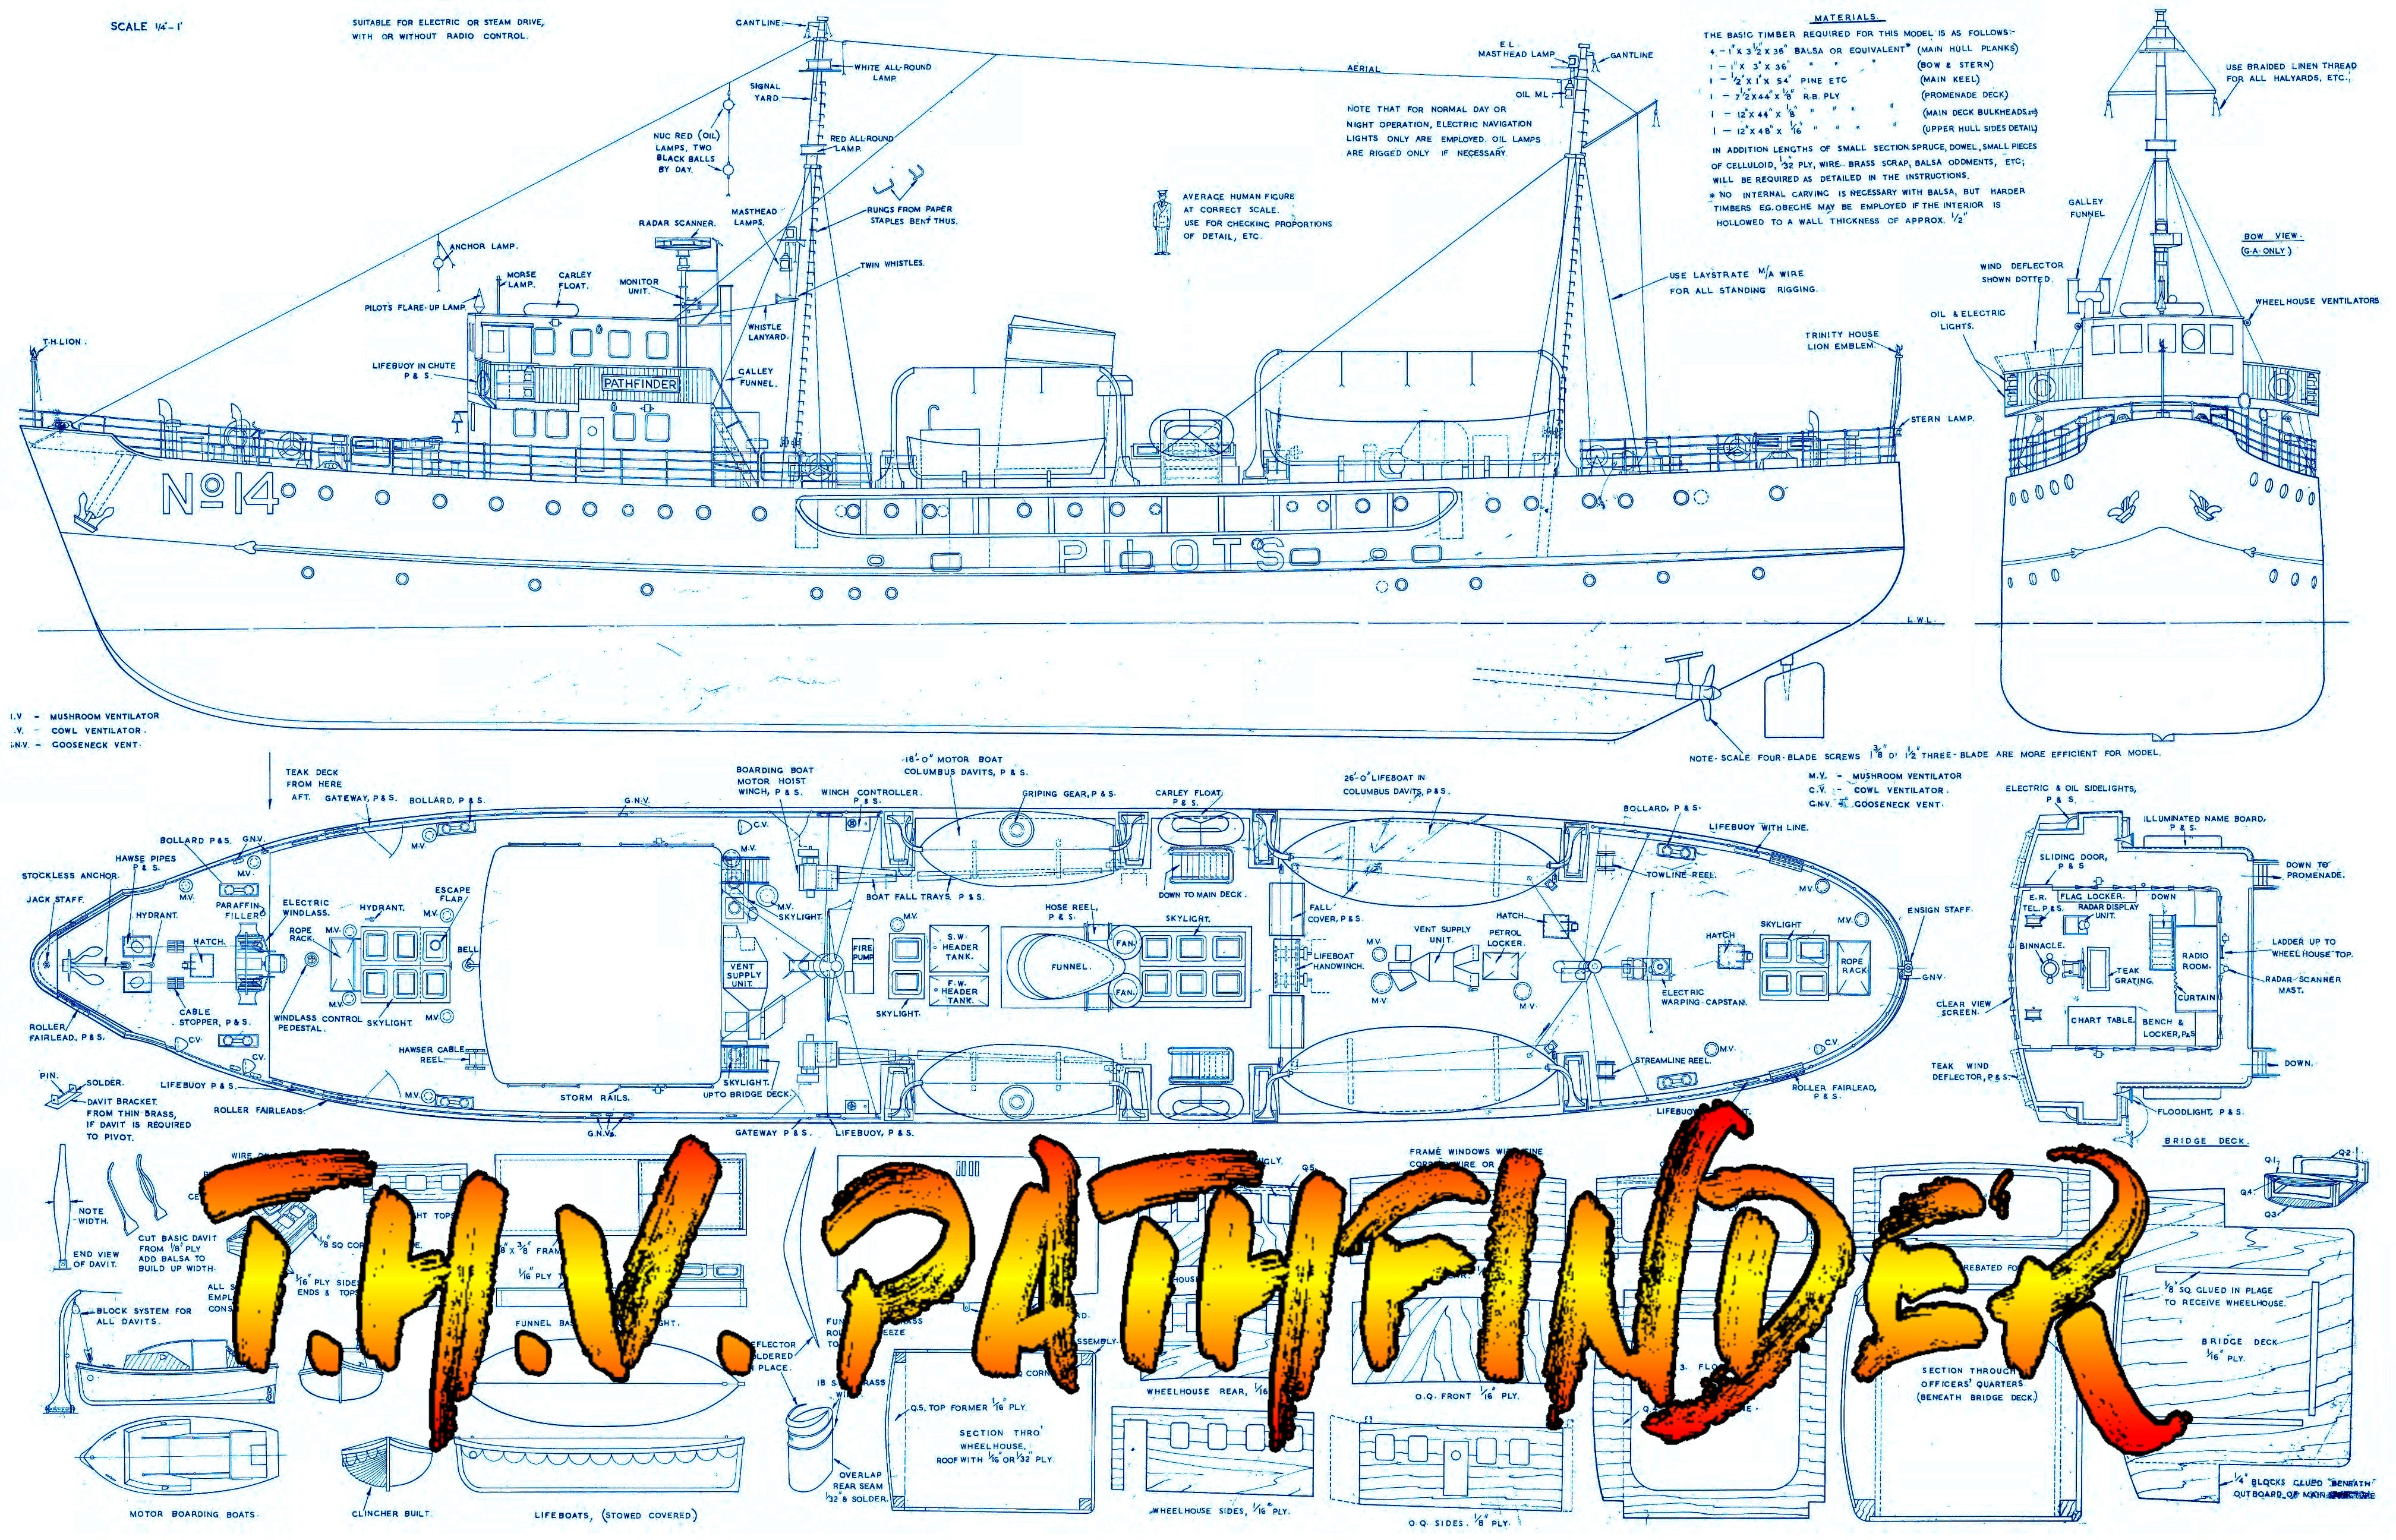 full size plans scale ¼”=1ft length 43 7/8” pilot tender t.h.v. pathfinder suitable for radio control